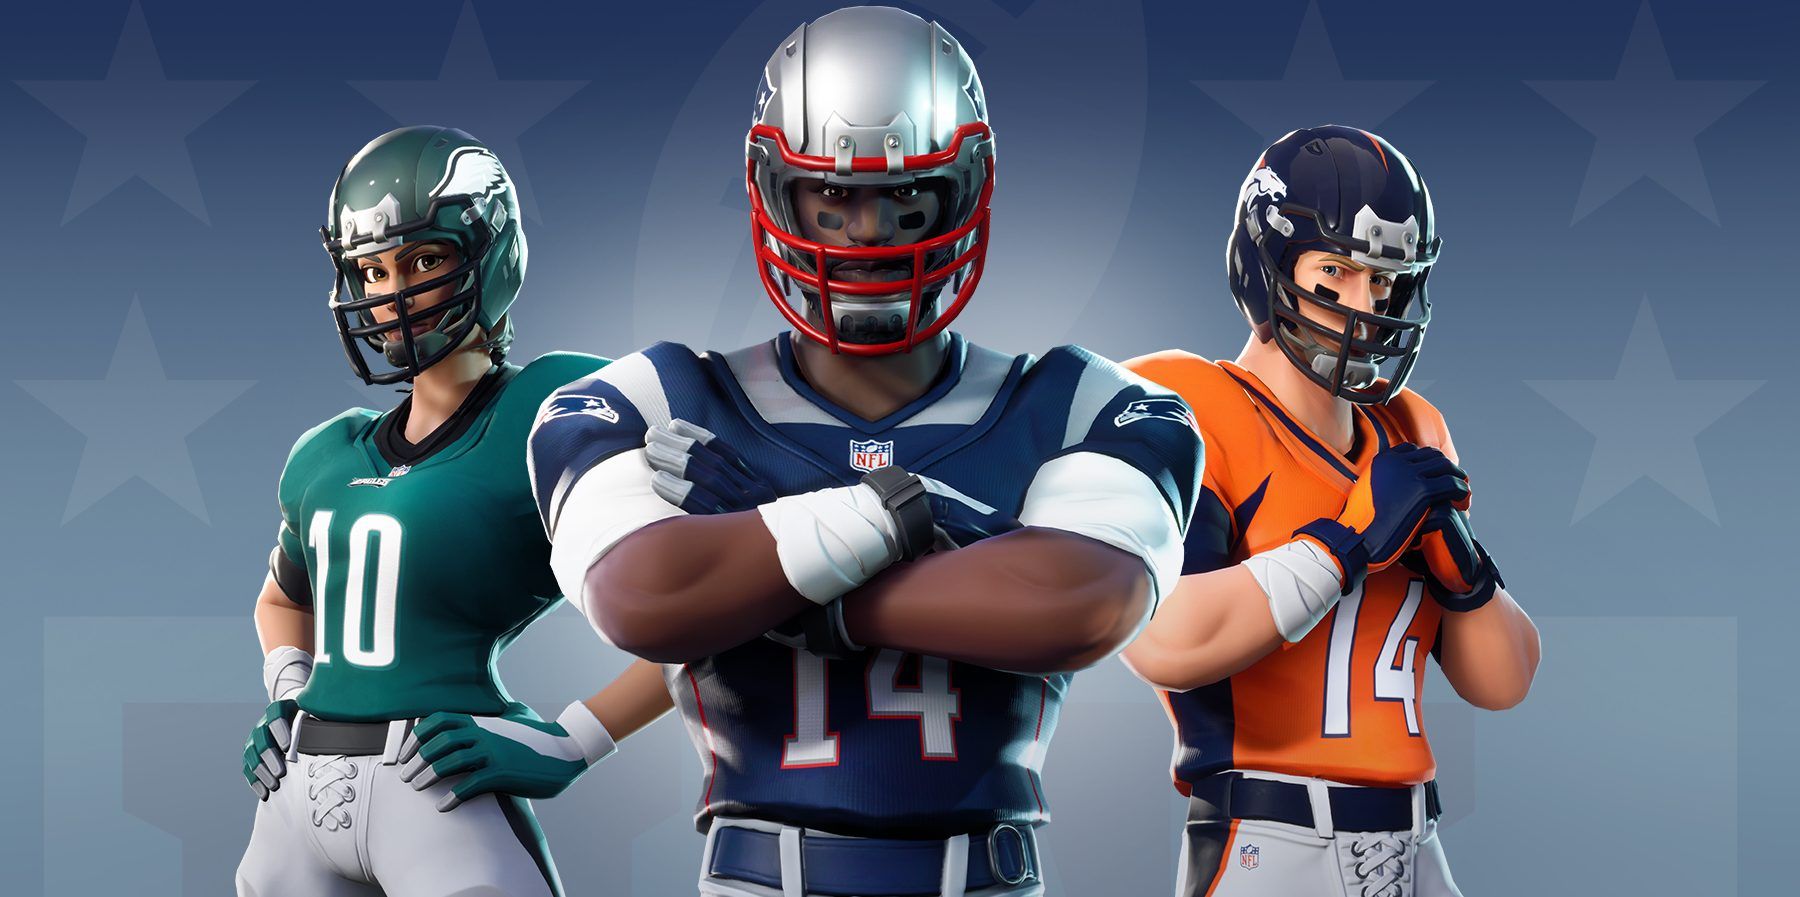 Fortnite Teams Up With NFL